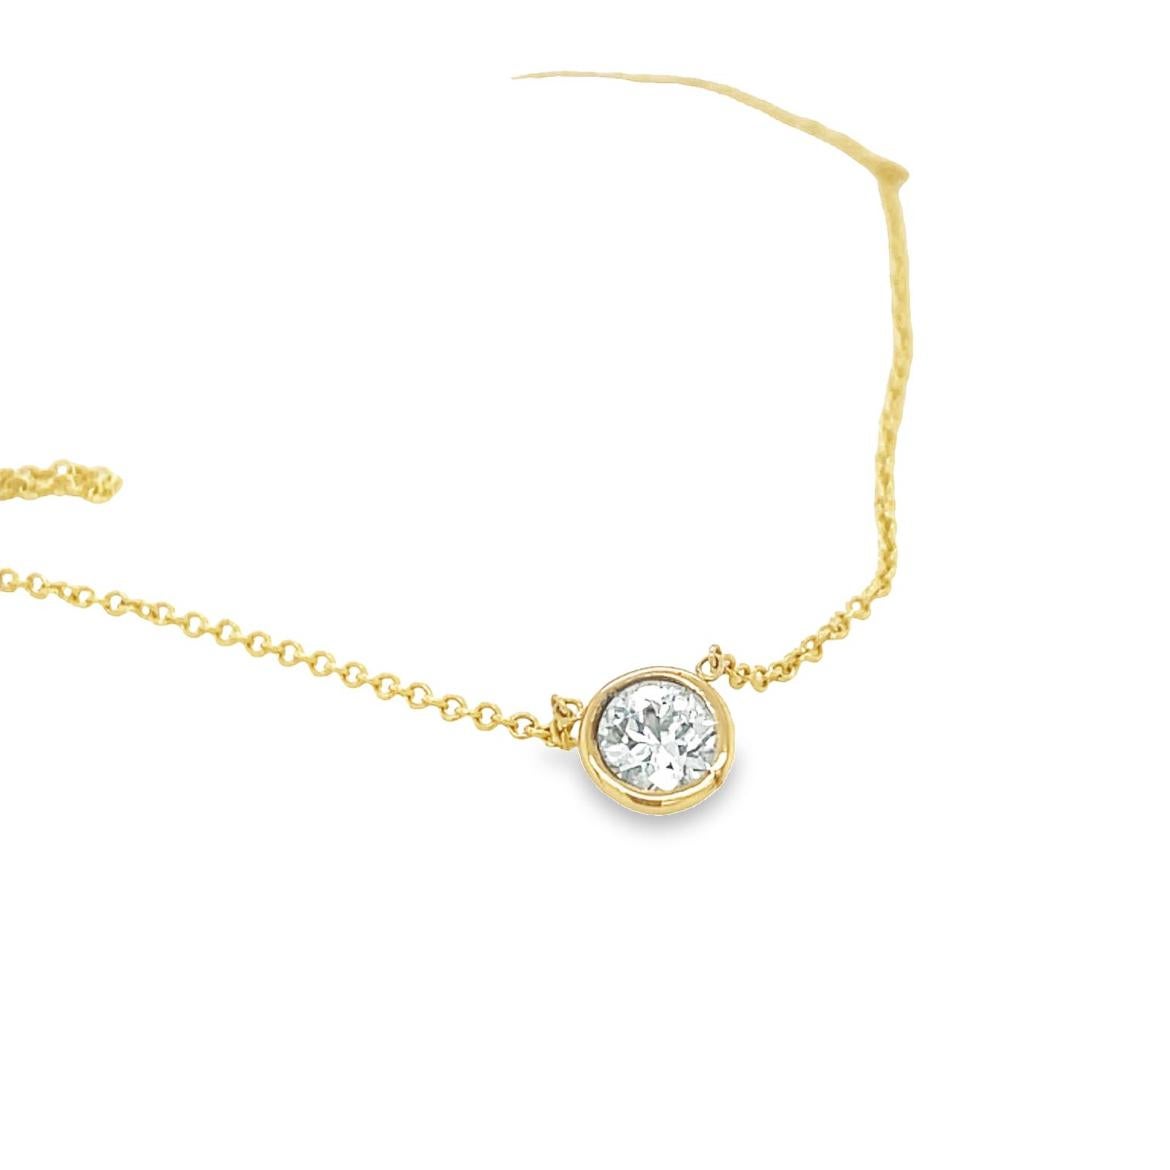 Ideal for your everyday signature necklace, this lovely  pendant necklace come set in 14k yellow gold metal with a sleek bezel setting and breathtaking round-cut diamond with a total weight of 0.18 ct. color G & VS clarity. The chain is a delicate